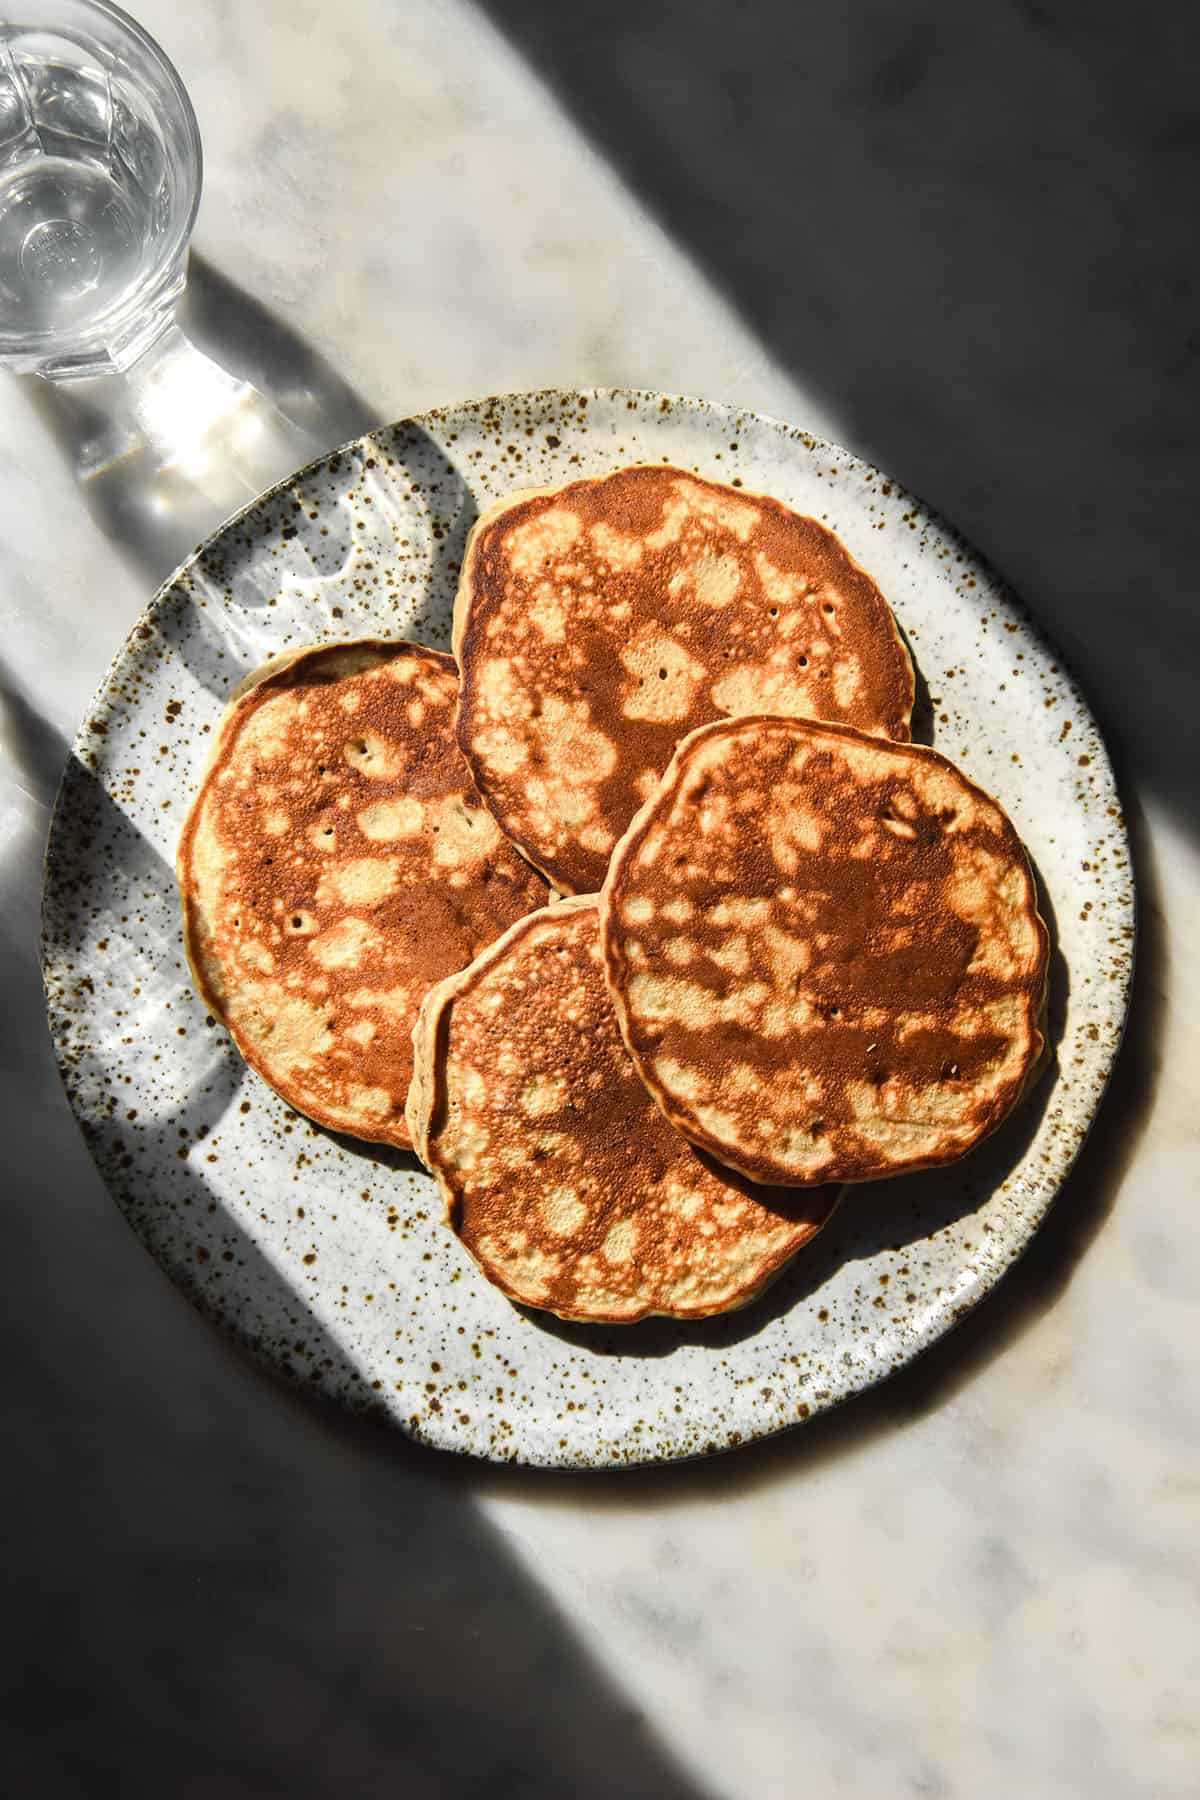 An aerial image of buckwheat banana pancakes in contrasting bright sunlight. The pancakes sit on a white speckled ceramic plate framed by water glasses and dark shadows to either side of the plate.